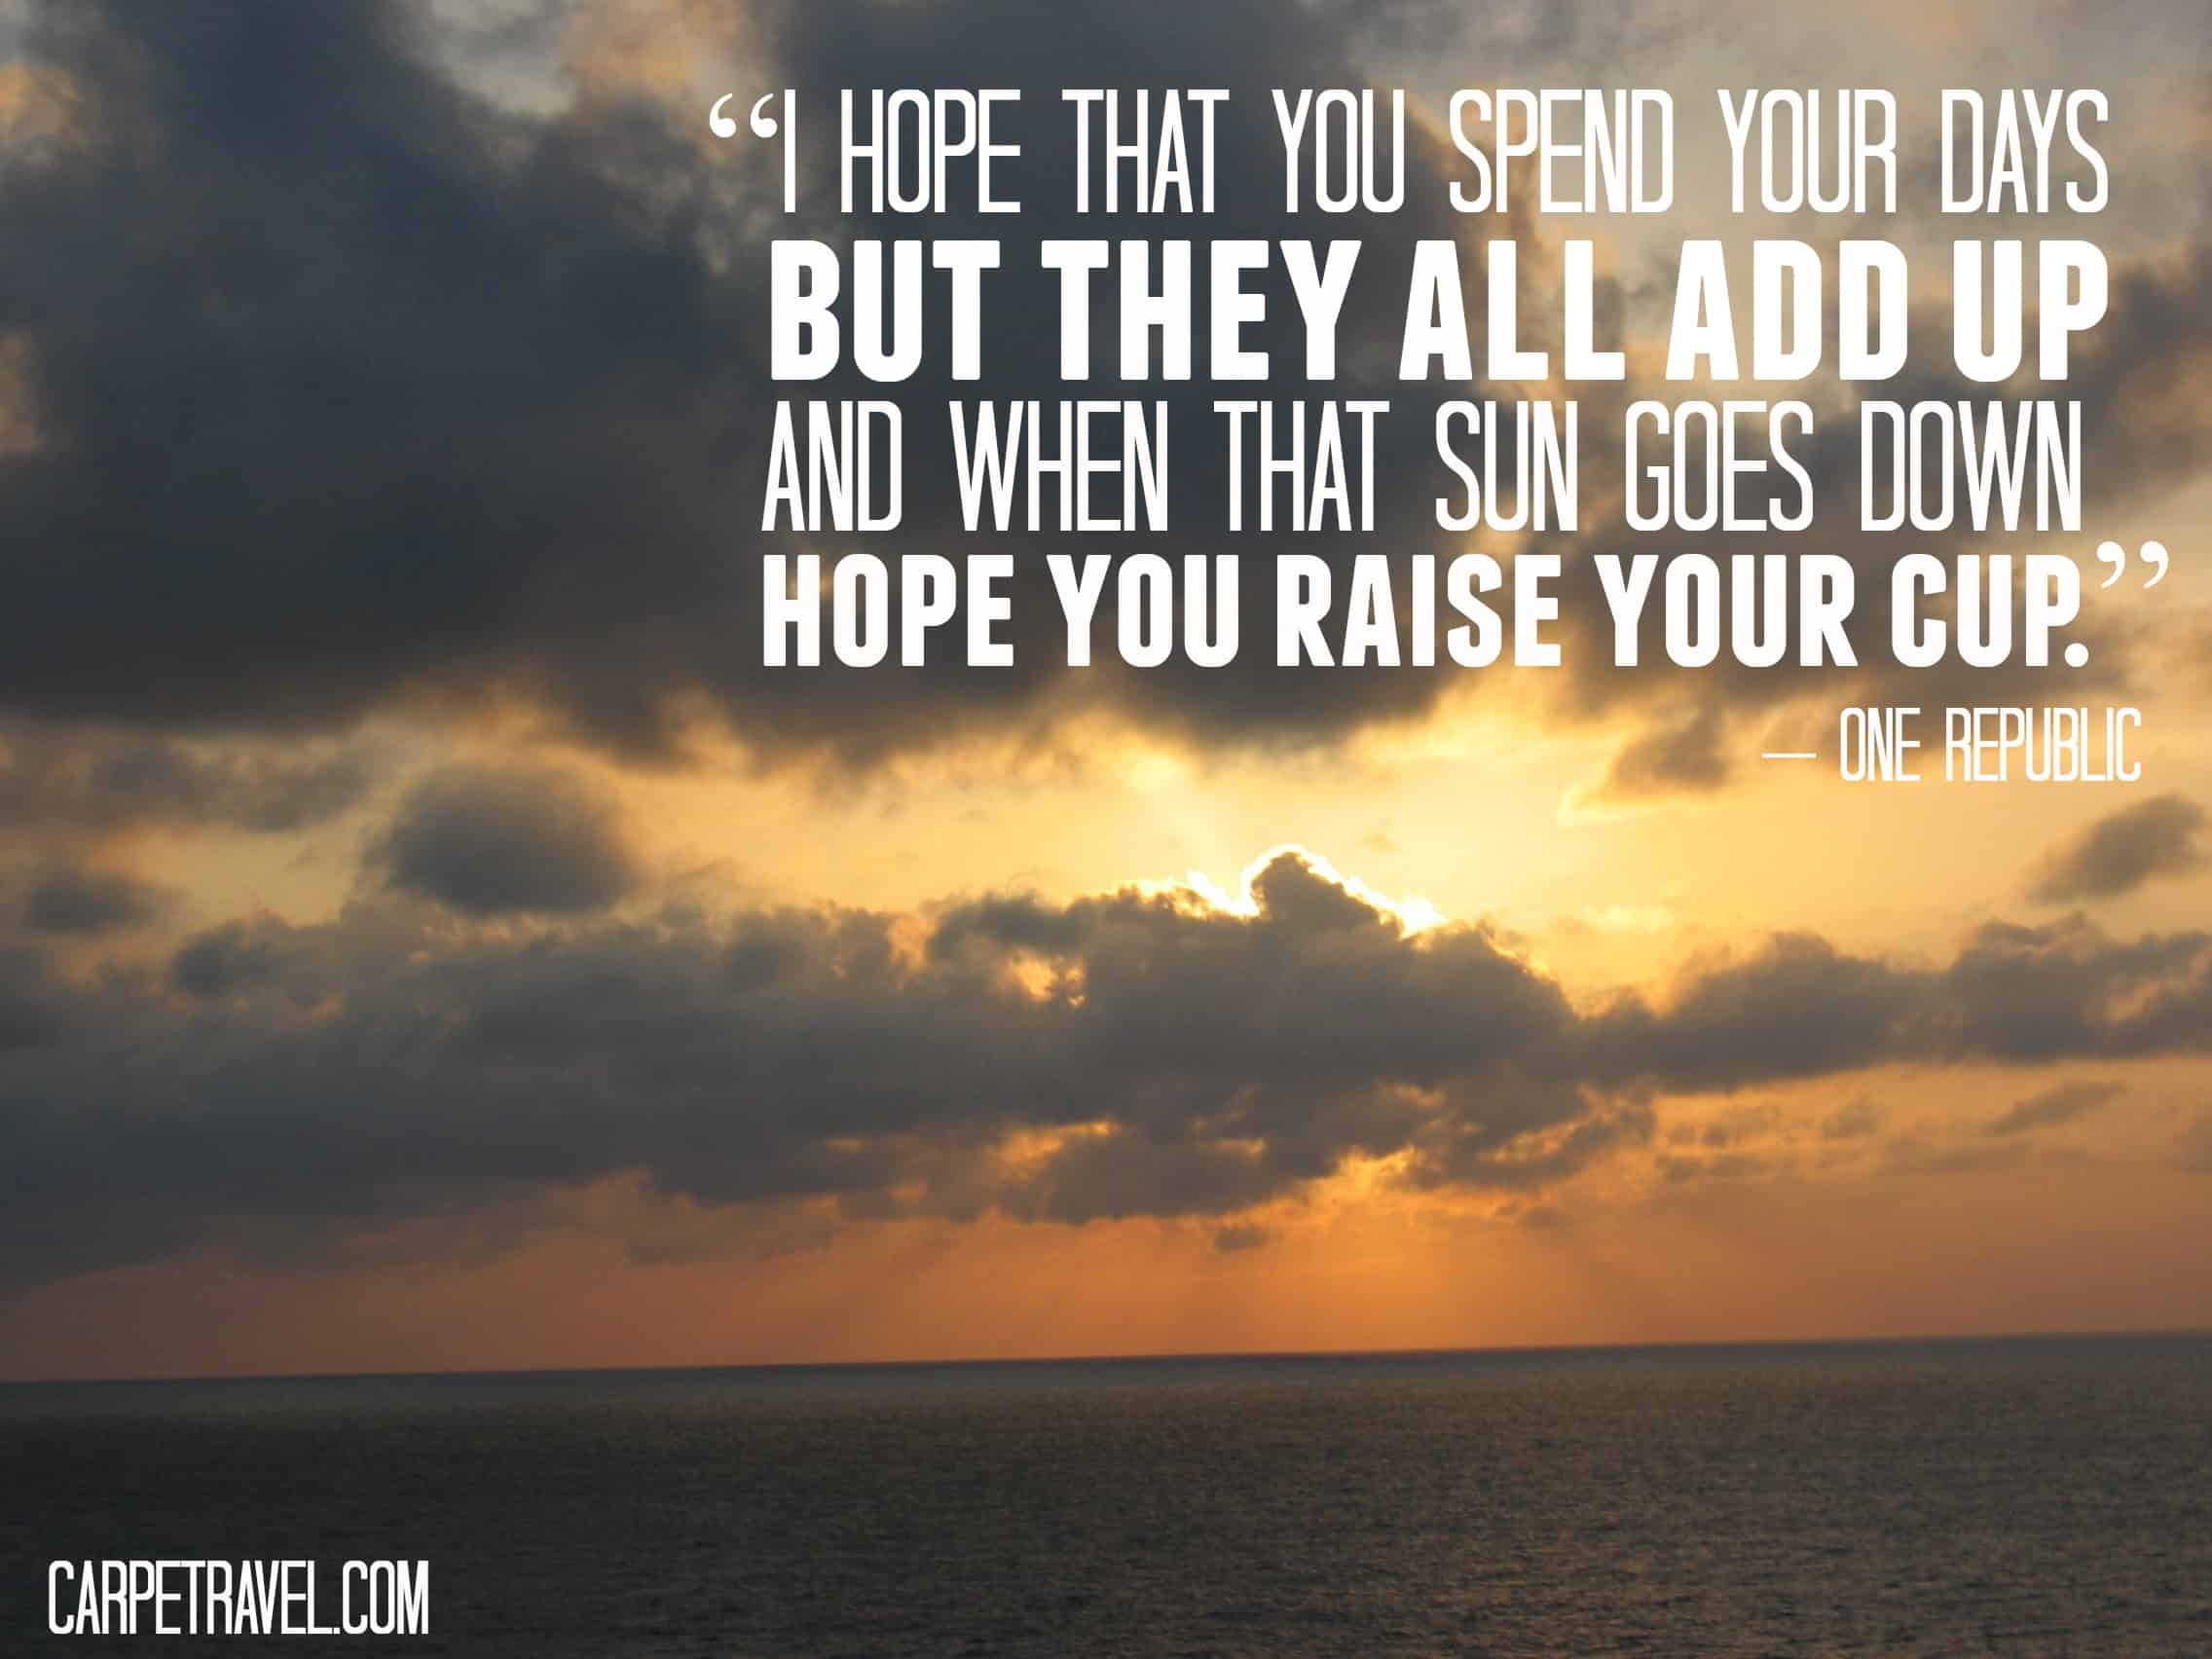 Inspirational Travel Quotes for 2015, Week 7: “I hope that you spend your days but they all add up and when that sun goes down hope you raise your cup.” – One Republic